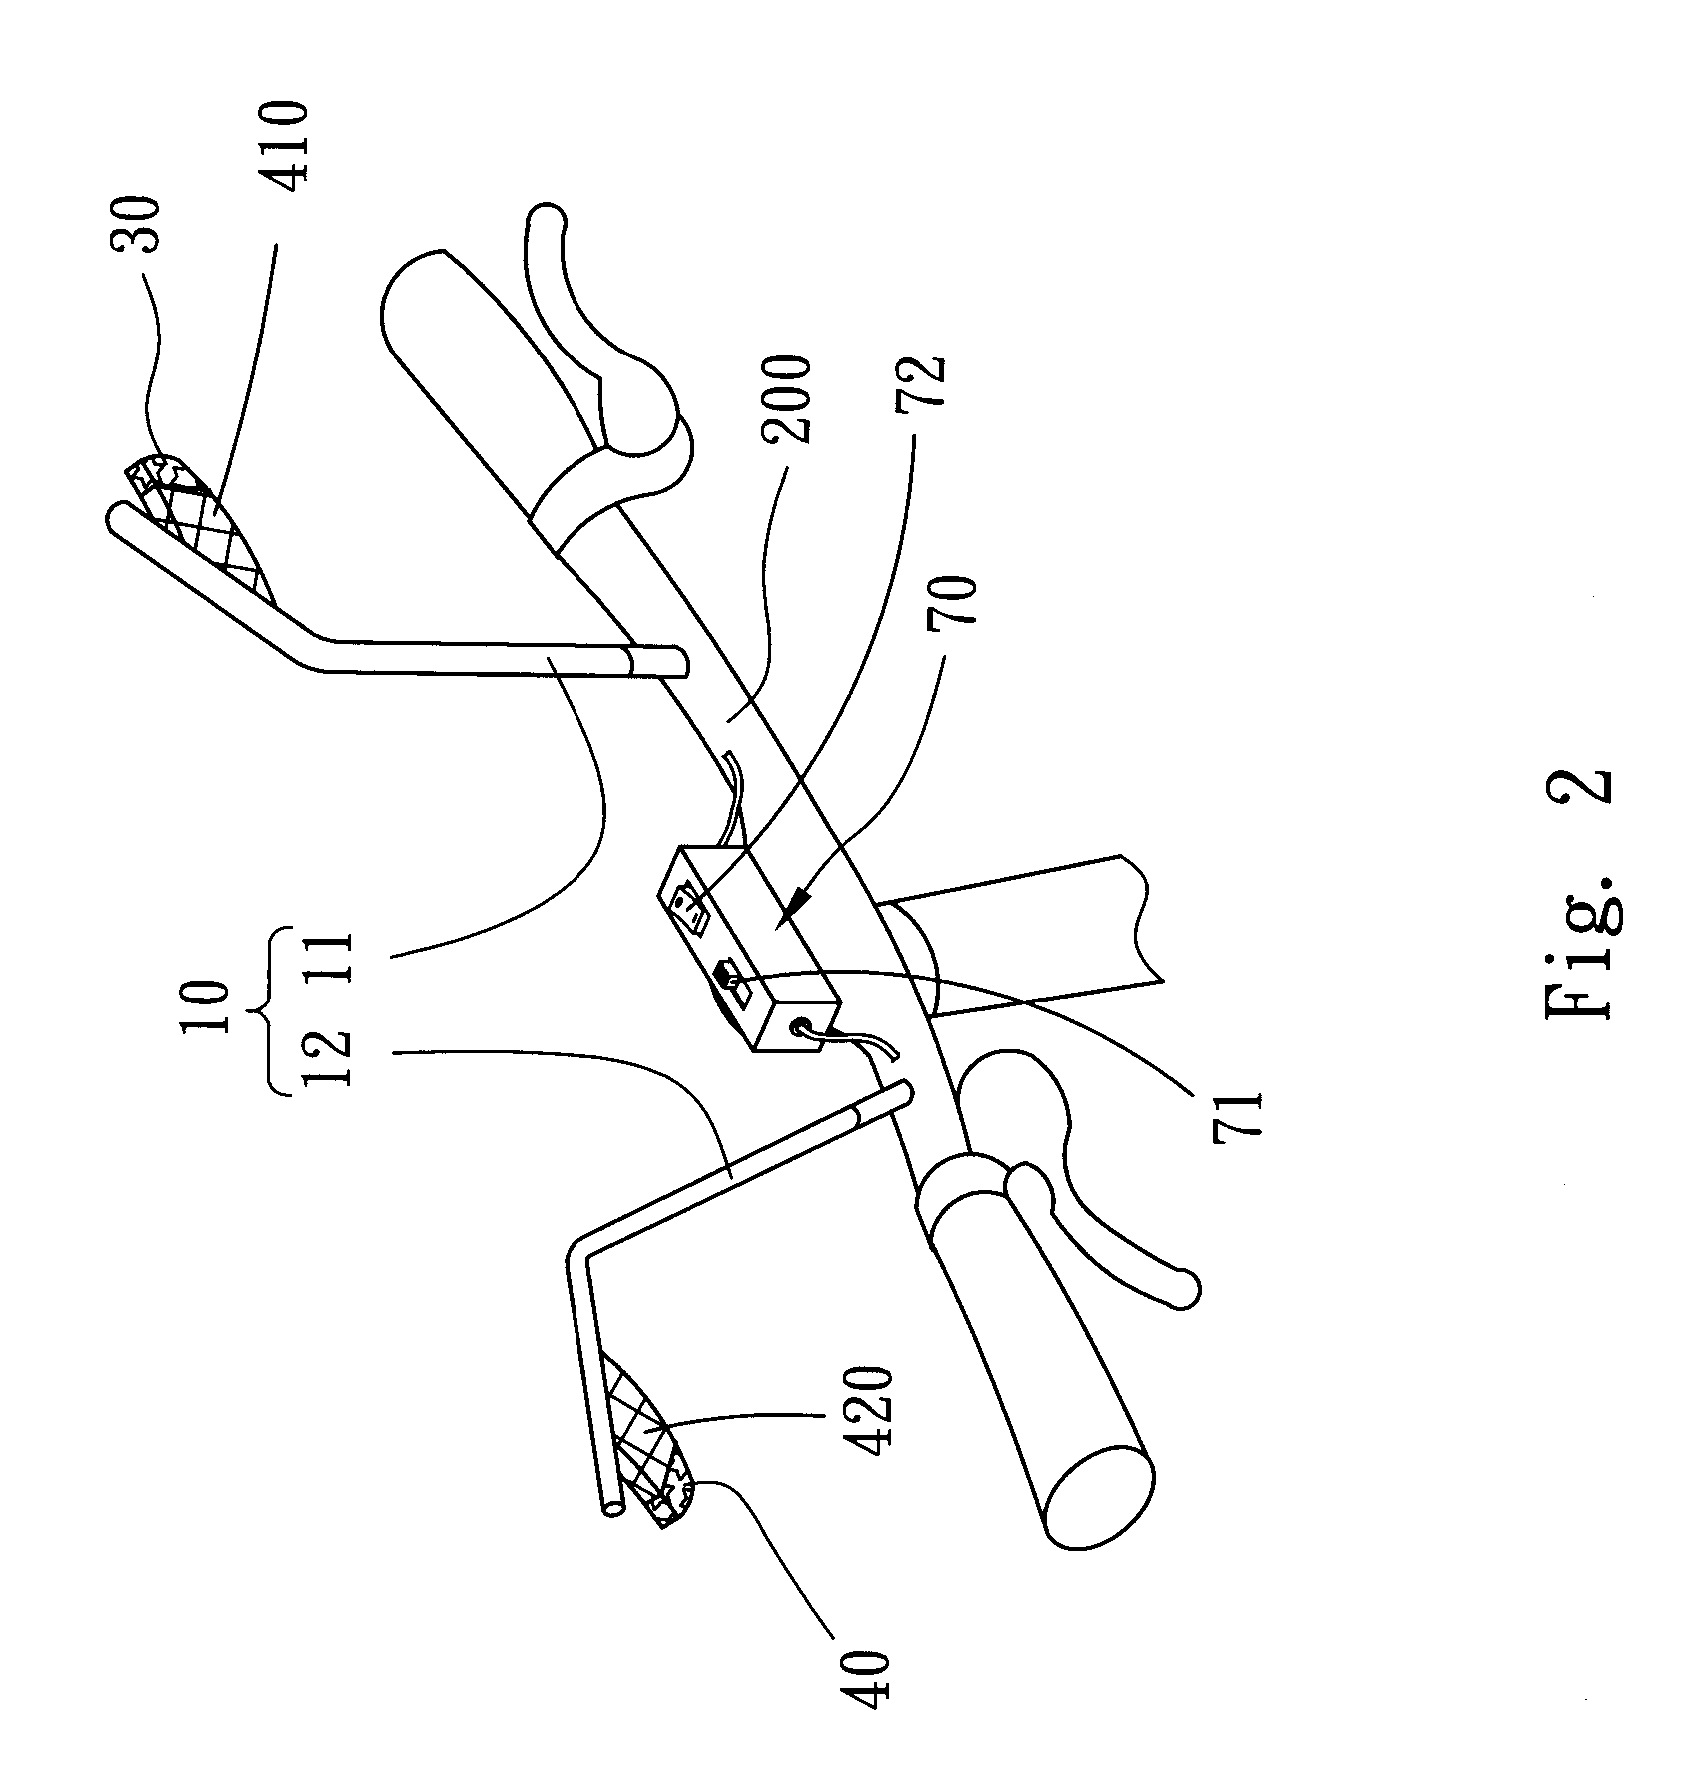 Direction light and illumination device for bicycle